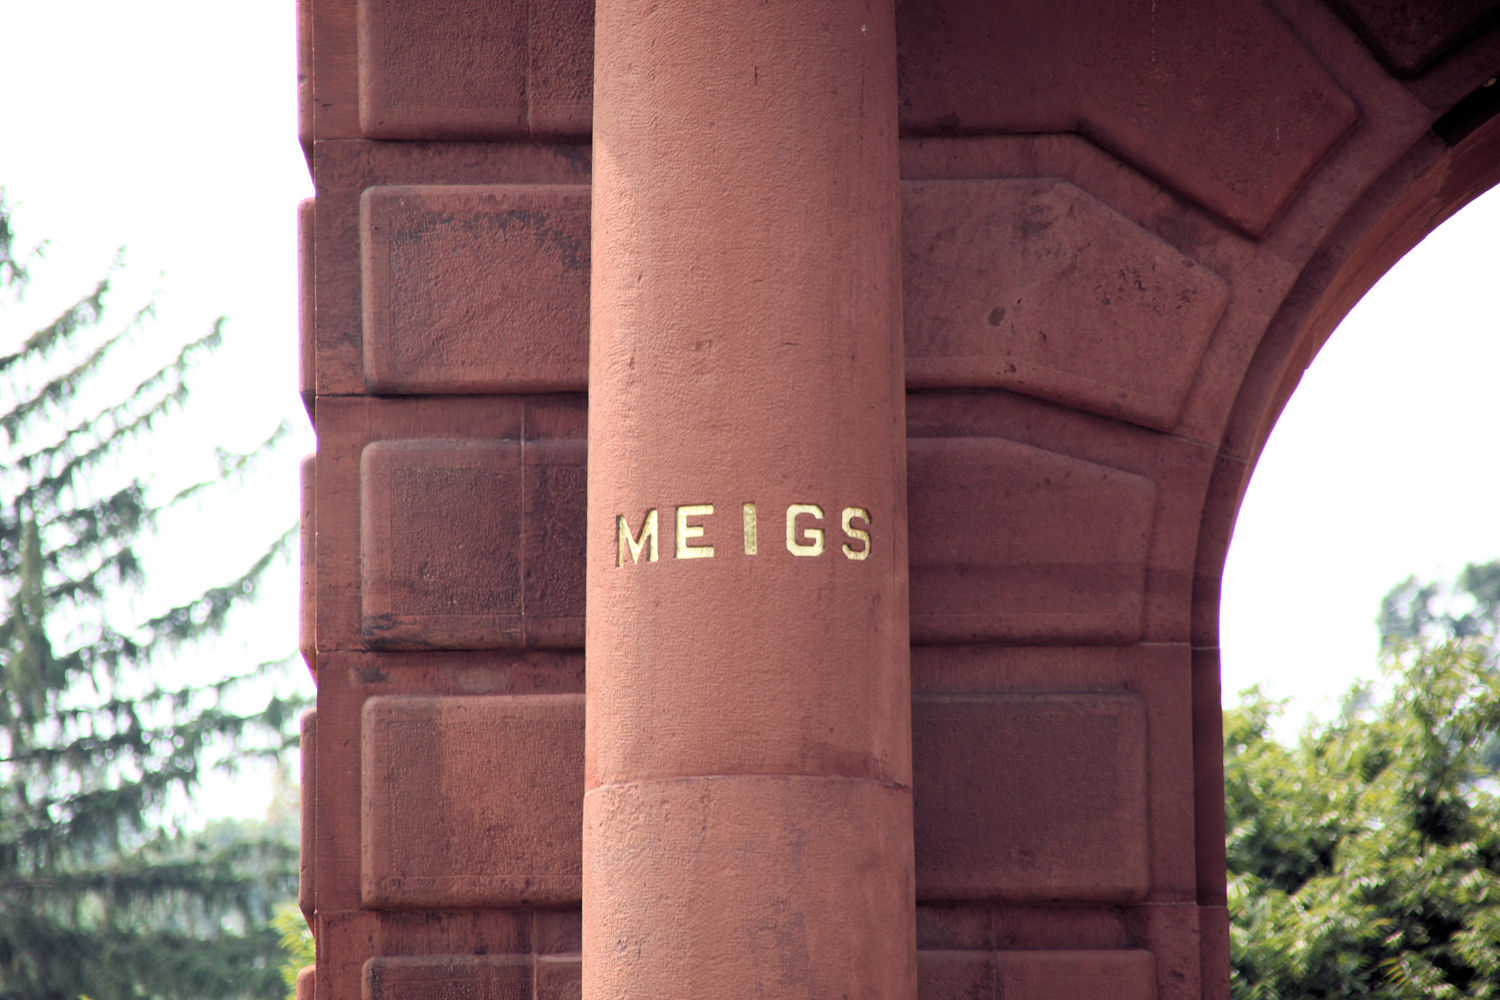 Meigs' name on McClellan Gate, By Tim1965 (Own work) [CC BY-SA 3.0 or GFDL], via Wikimedia Commons